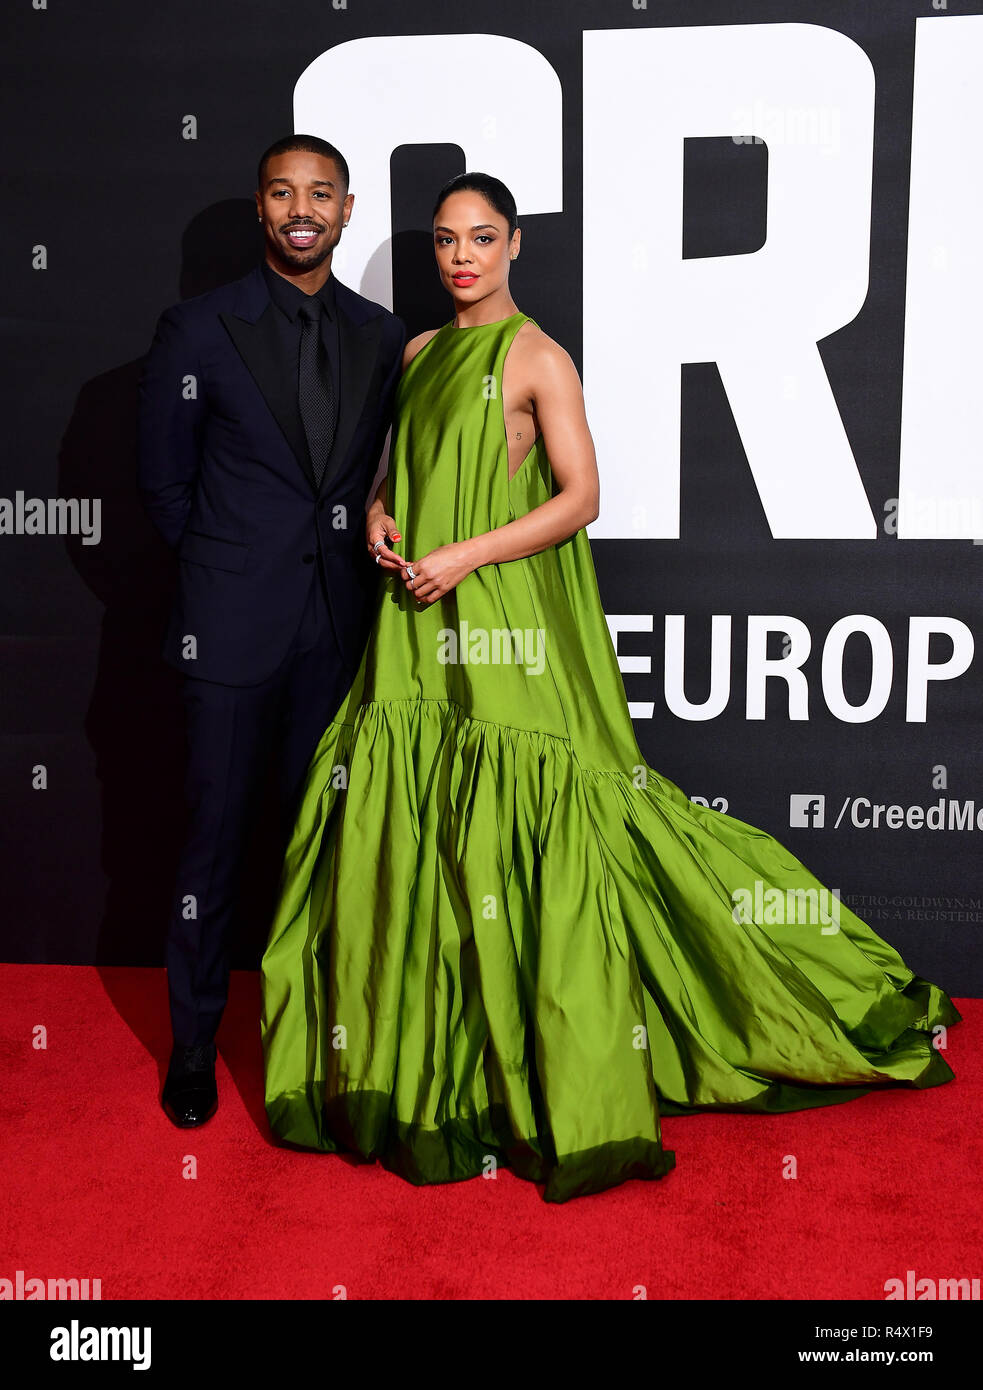 fad Bekostning Trænge ind Michael B. Jordan and Tessa Thompson attending the European premiere of  Creed 2 held at the BFI Imax, Waterloo, London Stock Photo - Alamy